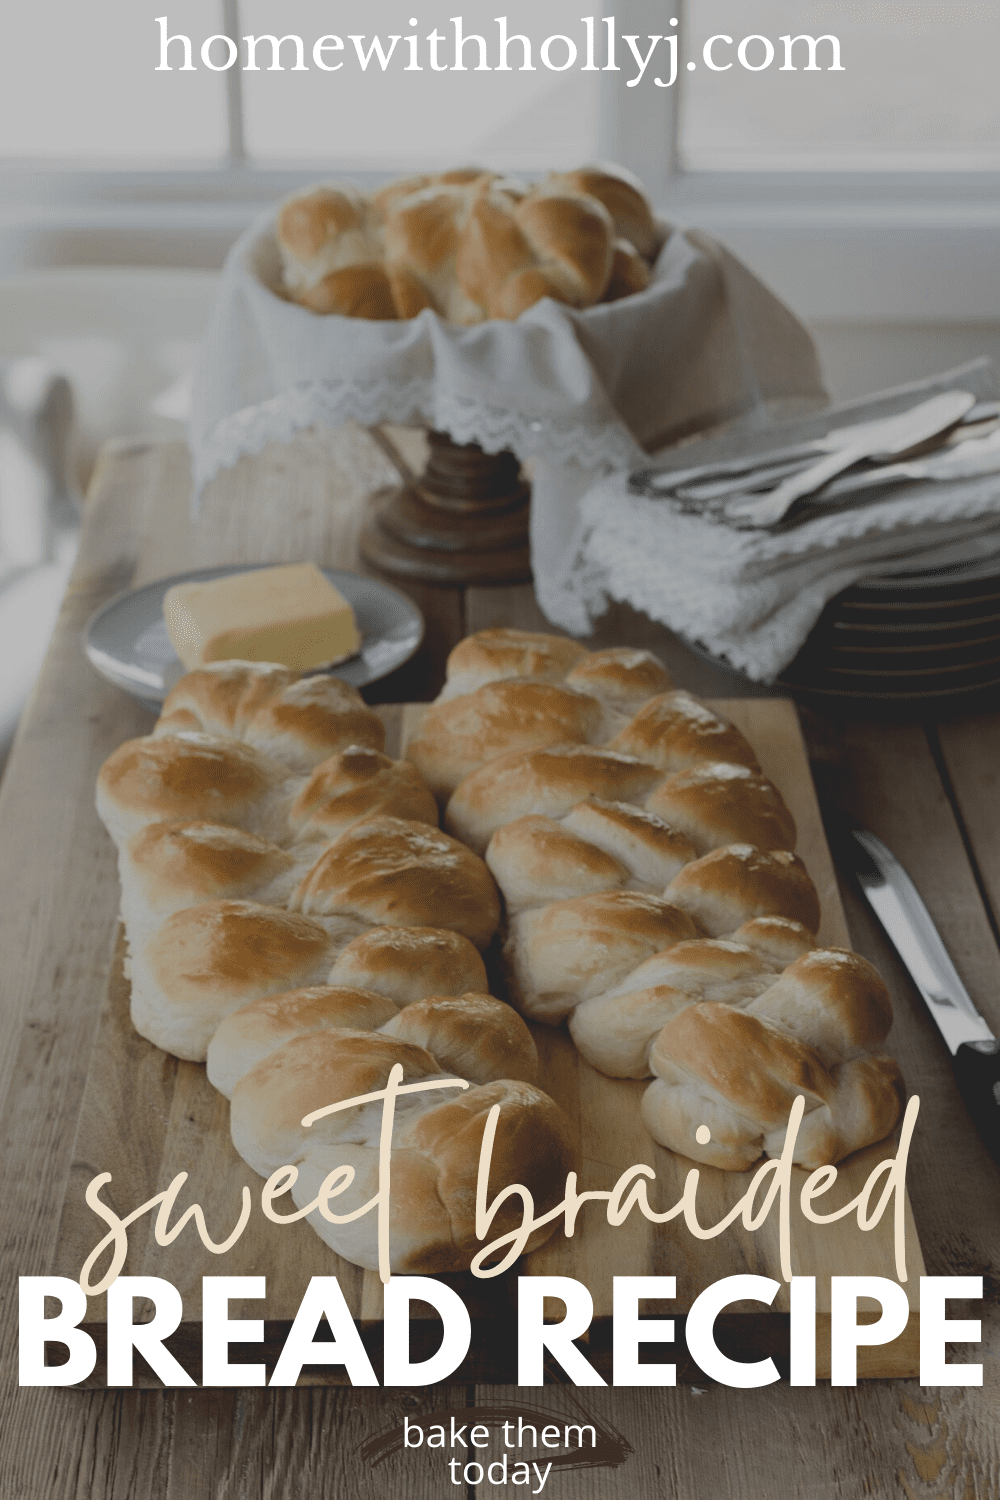 This is The Best Braided French Bread Recipe ever and it's not only delicious, it looks a little fancier than a regular loaf of bread.